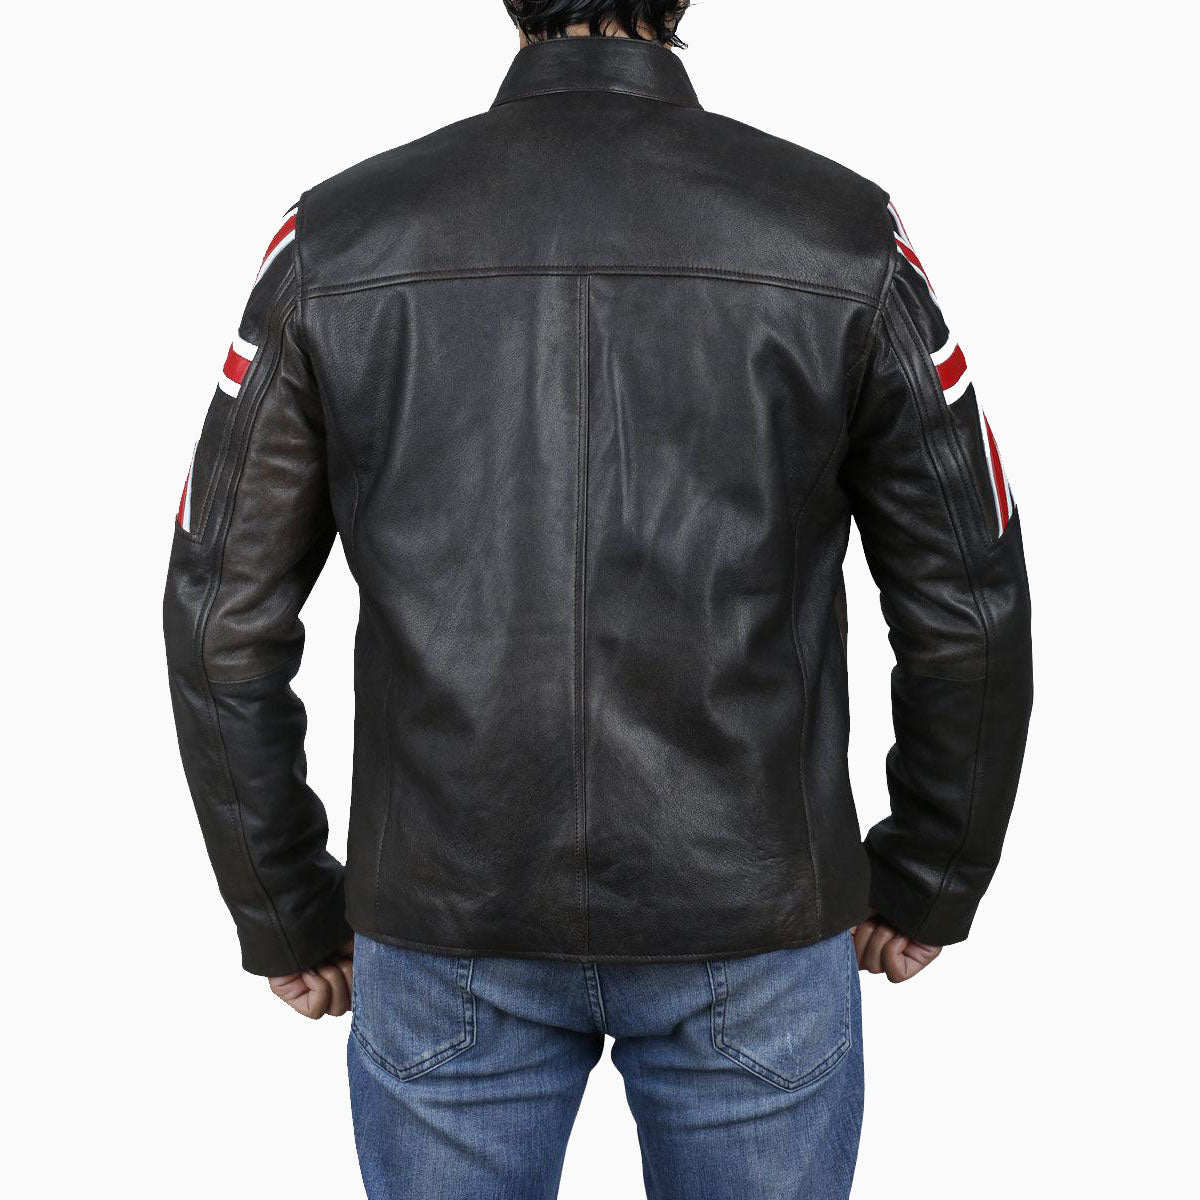 Men's Brown Leather Jacket with UK Flag Sleeves